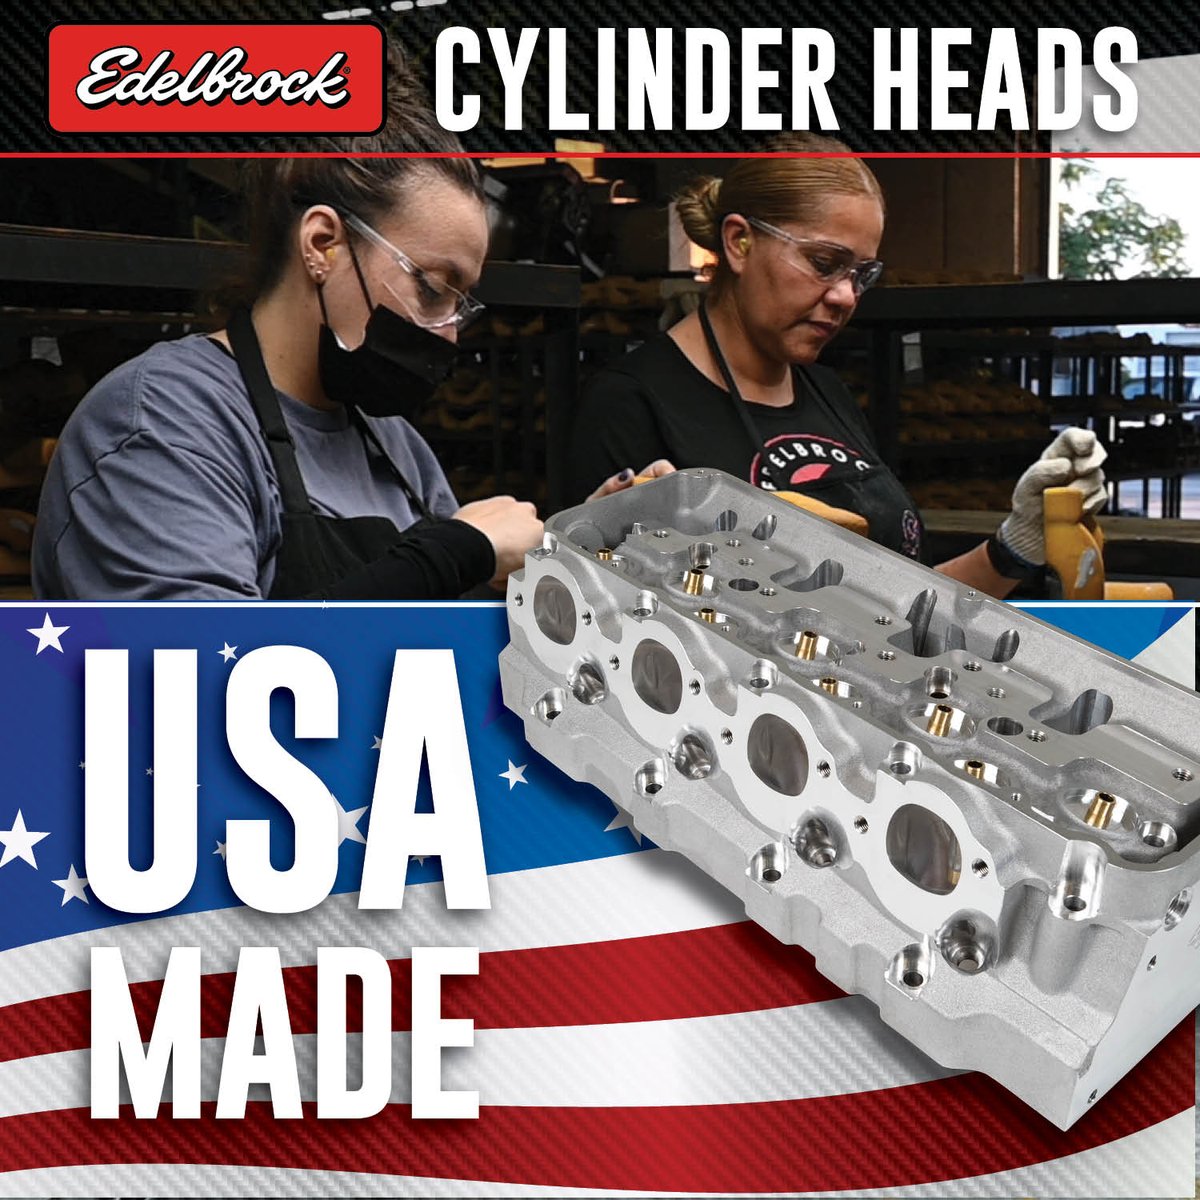 Our efficient port designs and state-of-the-art combustion chamber shapes, let us offer some of the best cylinder heads for improved performance. Made in the USA!!! #edelbrock #edelbrockperformance #racing #builtinusa #performance #autoracing #gofast